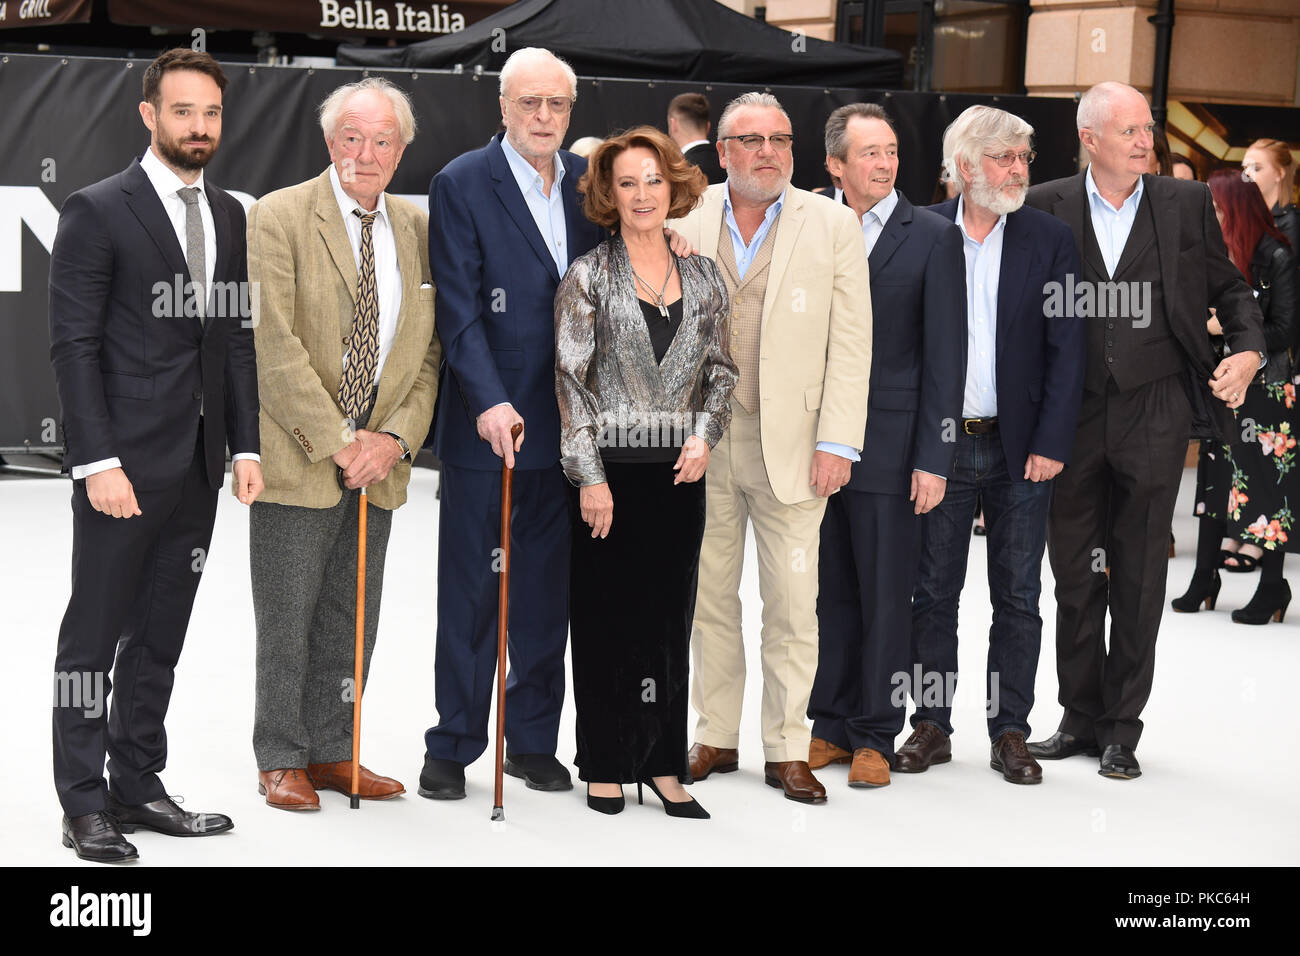 London, UK. September 12, 2018: Charlie Cox, Sir Michael Gambon, Sir Michael Caine, Francesca Annis, Ray Winstone,  Sir Tom Courtenay & Jim Broadbent at the World Premiere of 'King of Thieves' at the Vue Cinema, Leicester Square, London. Picture: Steve Vas/Featureflash Credit: Sarah Stewart/Alamy Live News Stock Photo